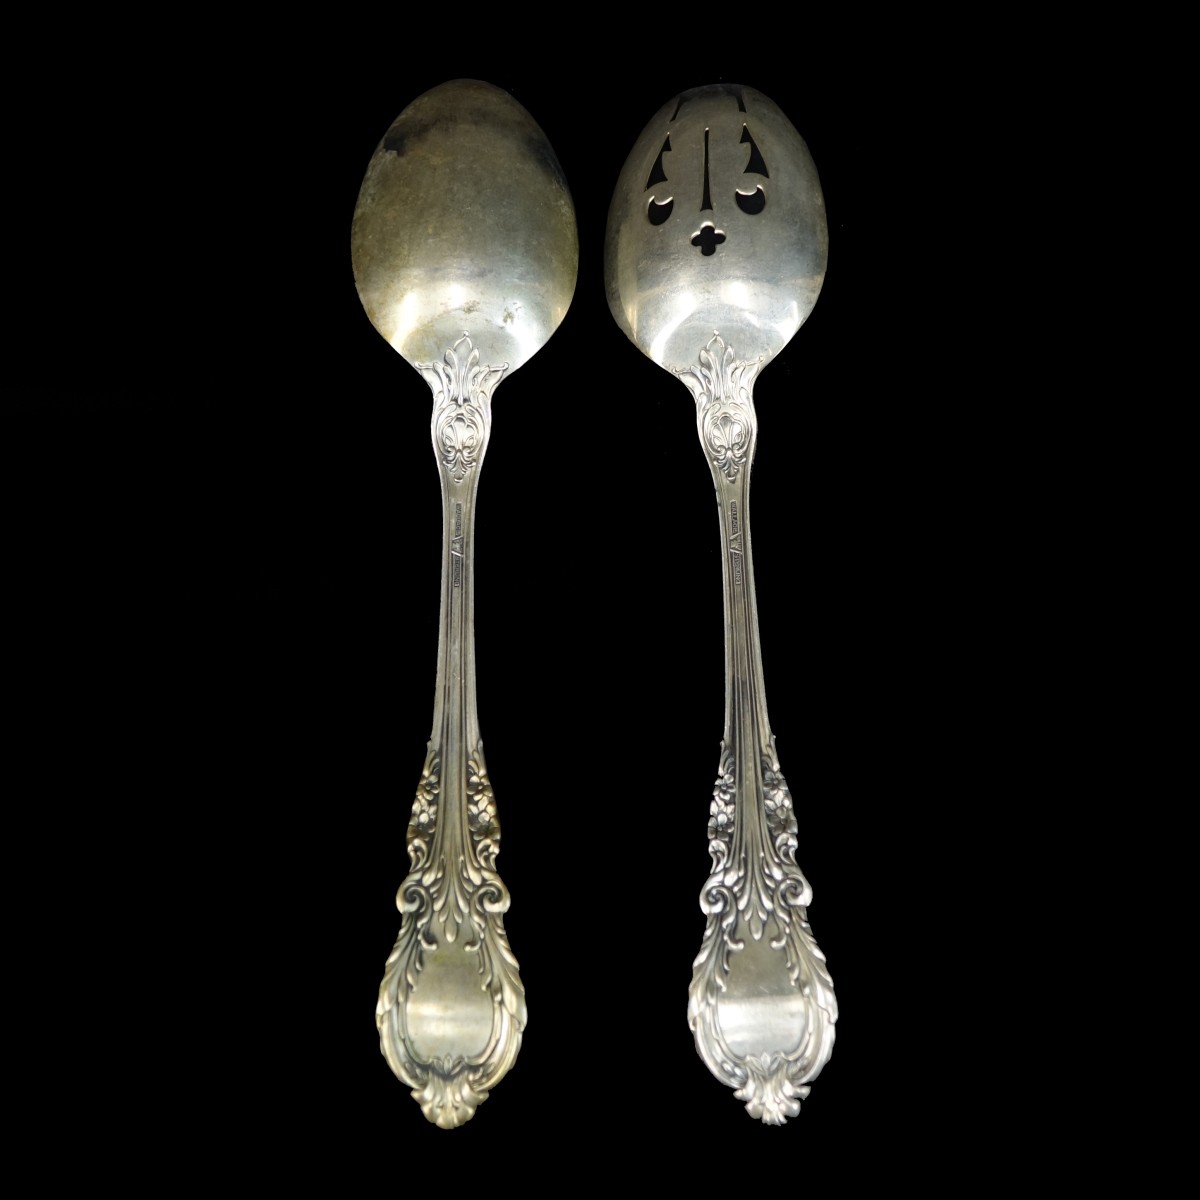 Wallace "Sir Christopher" Serving Spoons